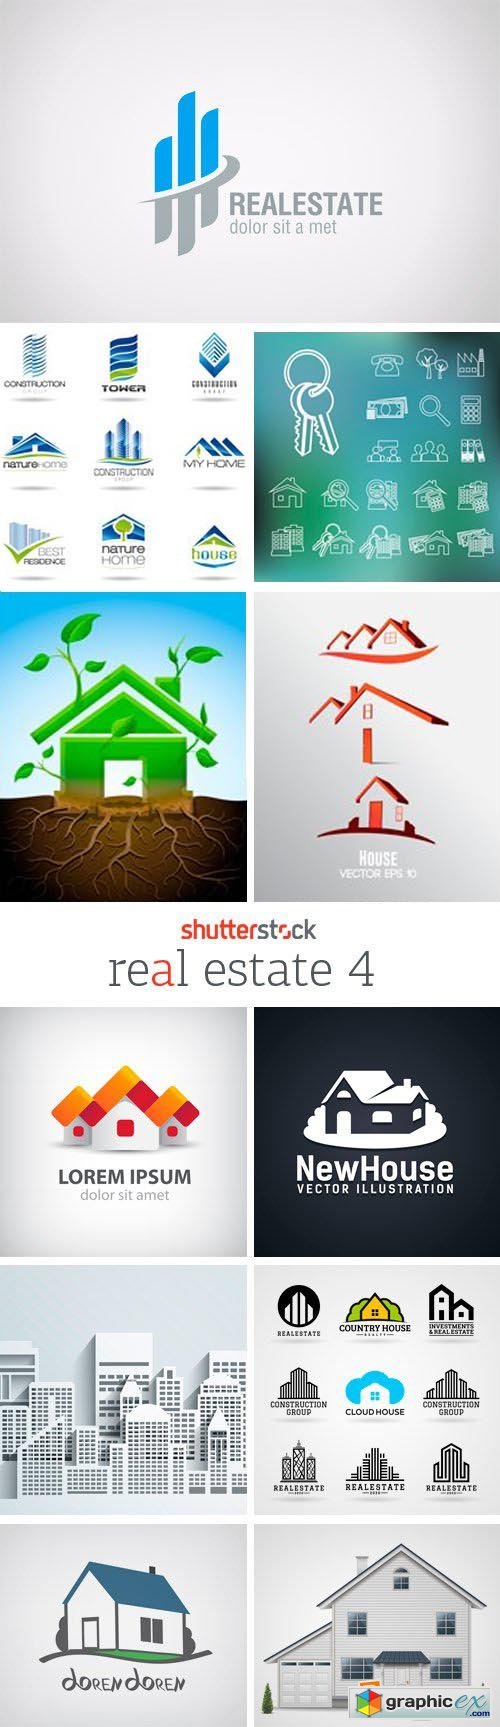 Amazing SS - Real Estate 4, 25xEPS